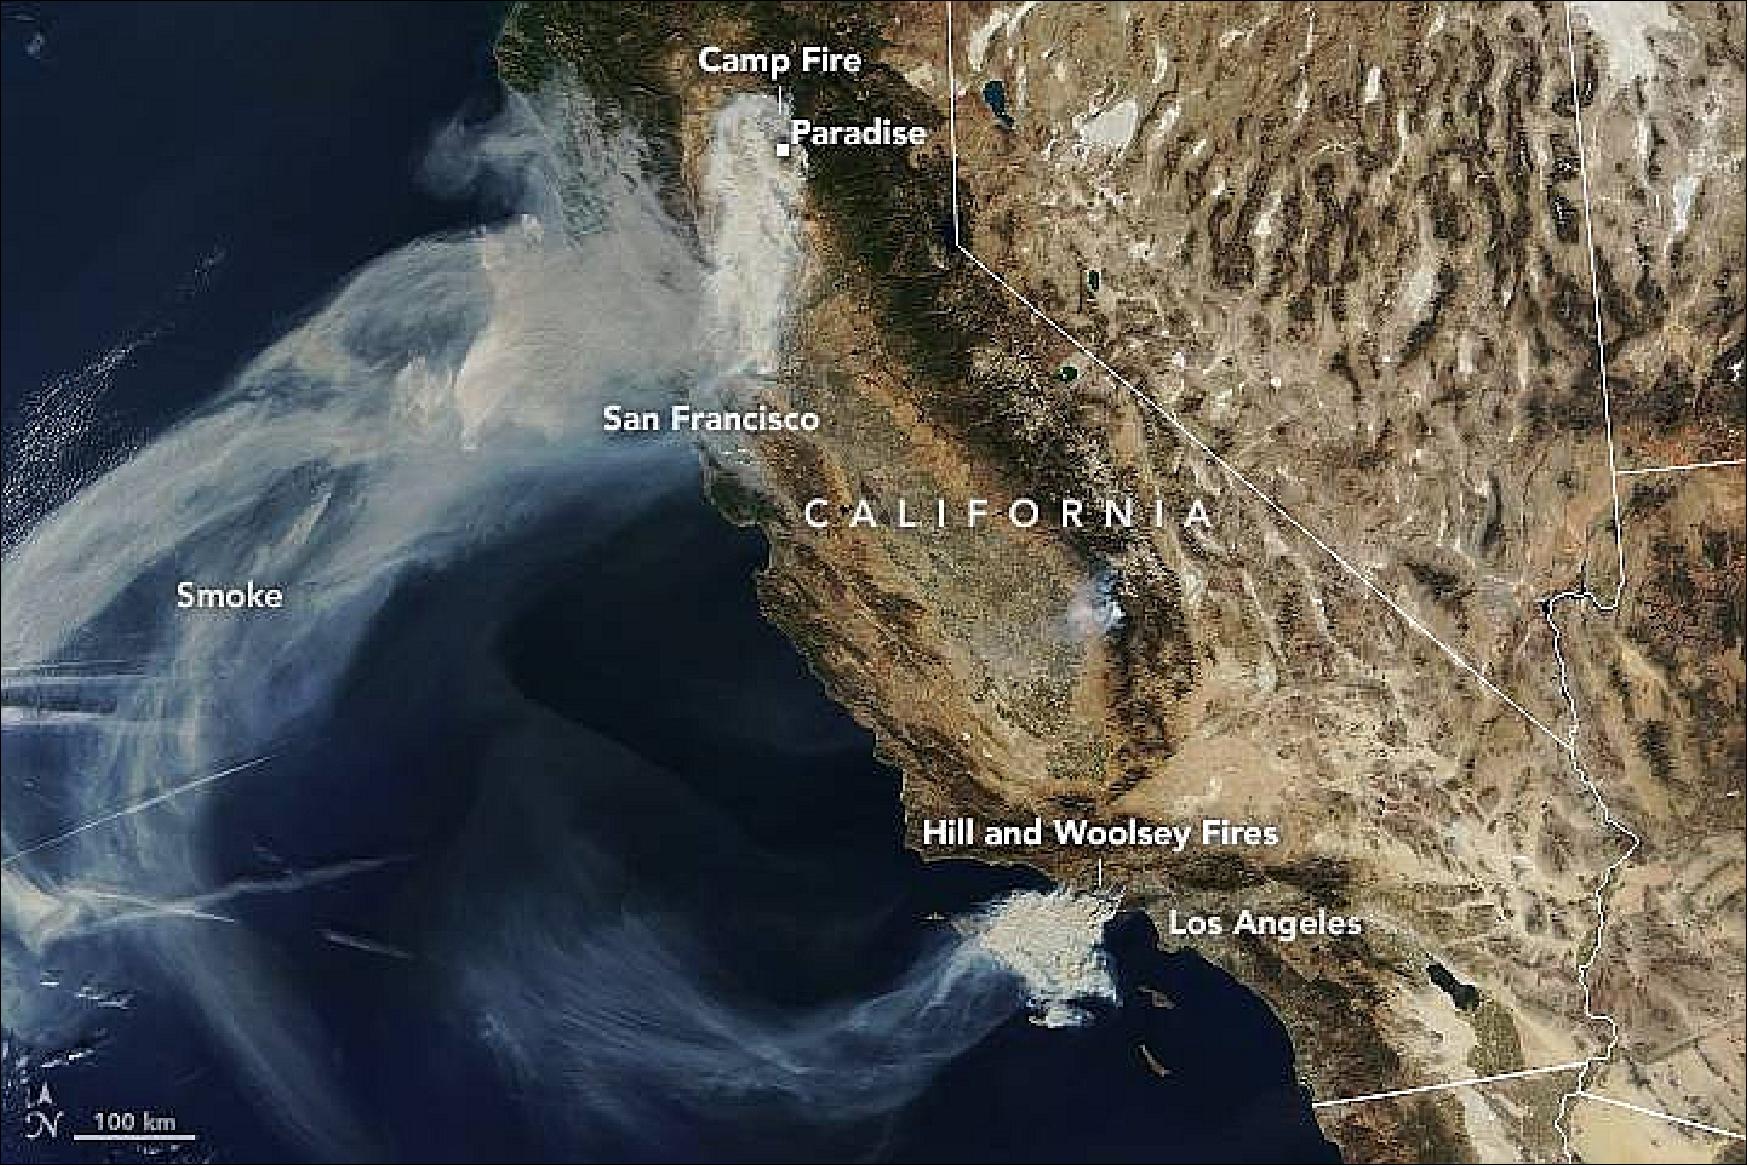 Figure 7: Annotated image of the Camp Fire in Northern California and the Hill and Woolsey fires in southern California, taken Nov. 9, 2018, by the MODIS instrument on NASA's Terra satellite (image credit: NASA Earth Observatory)